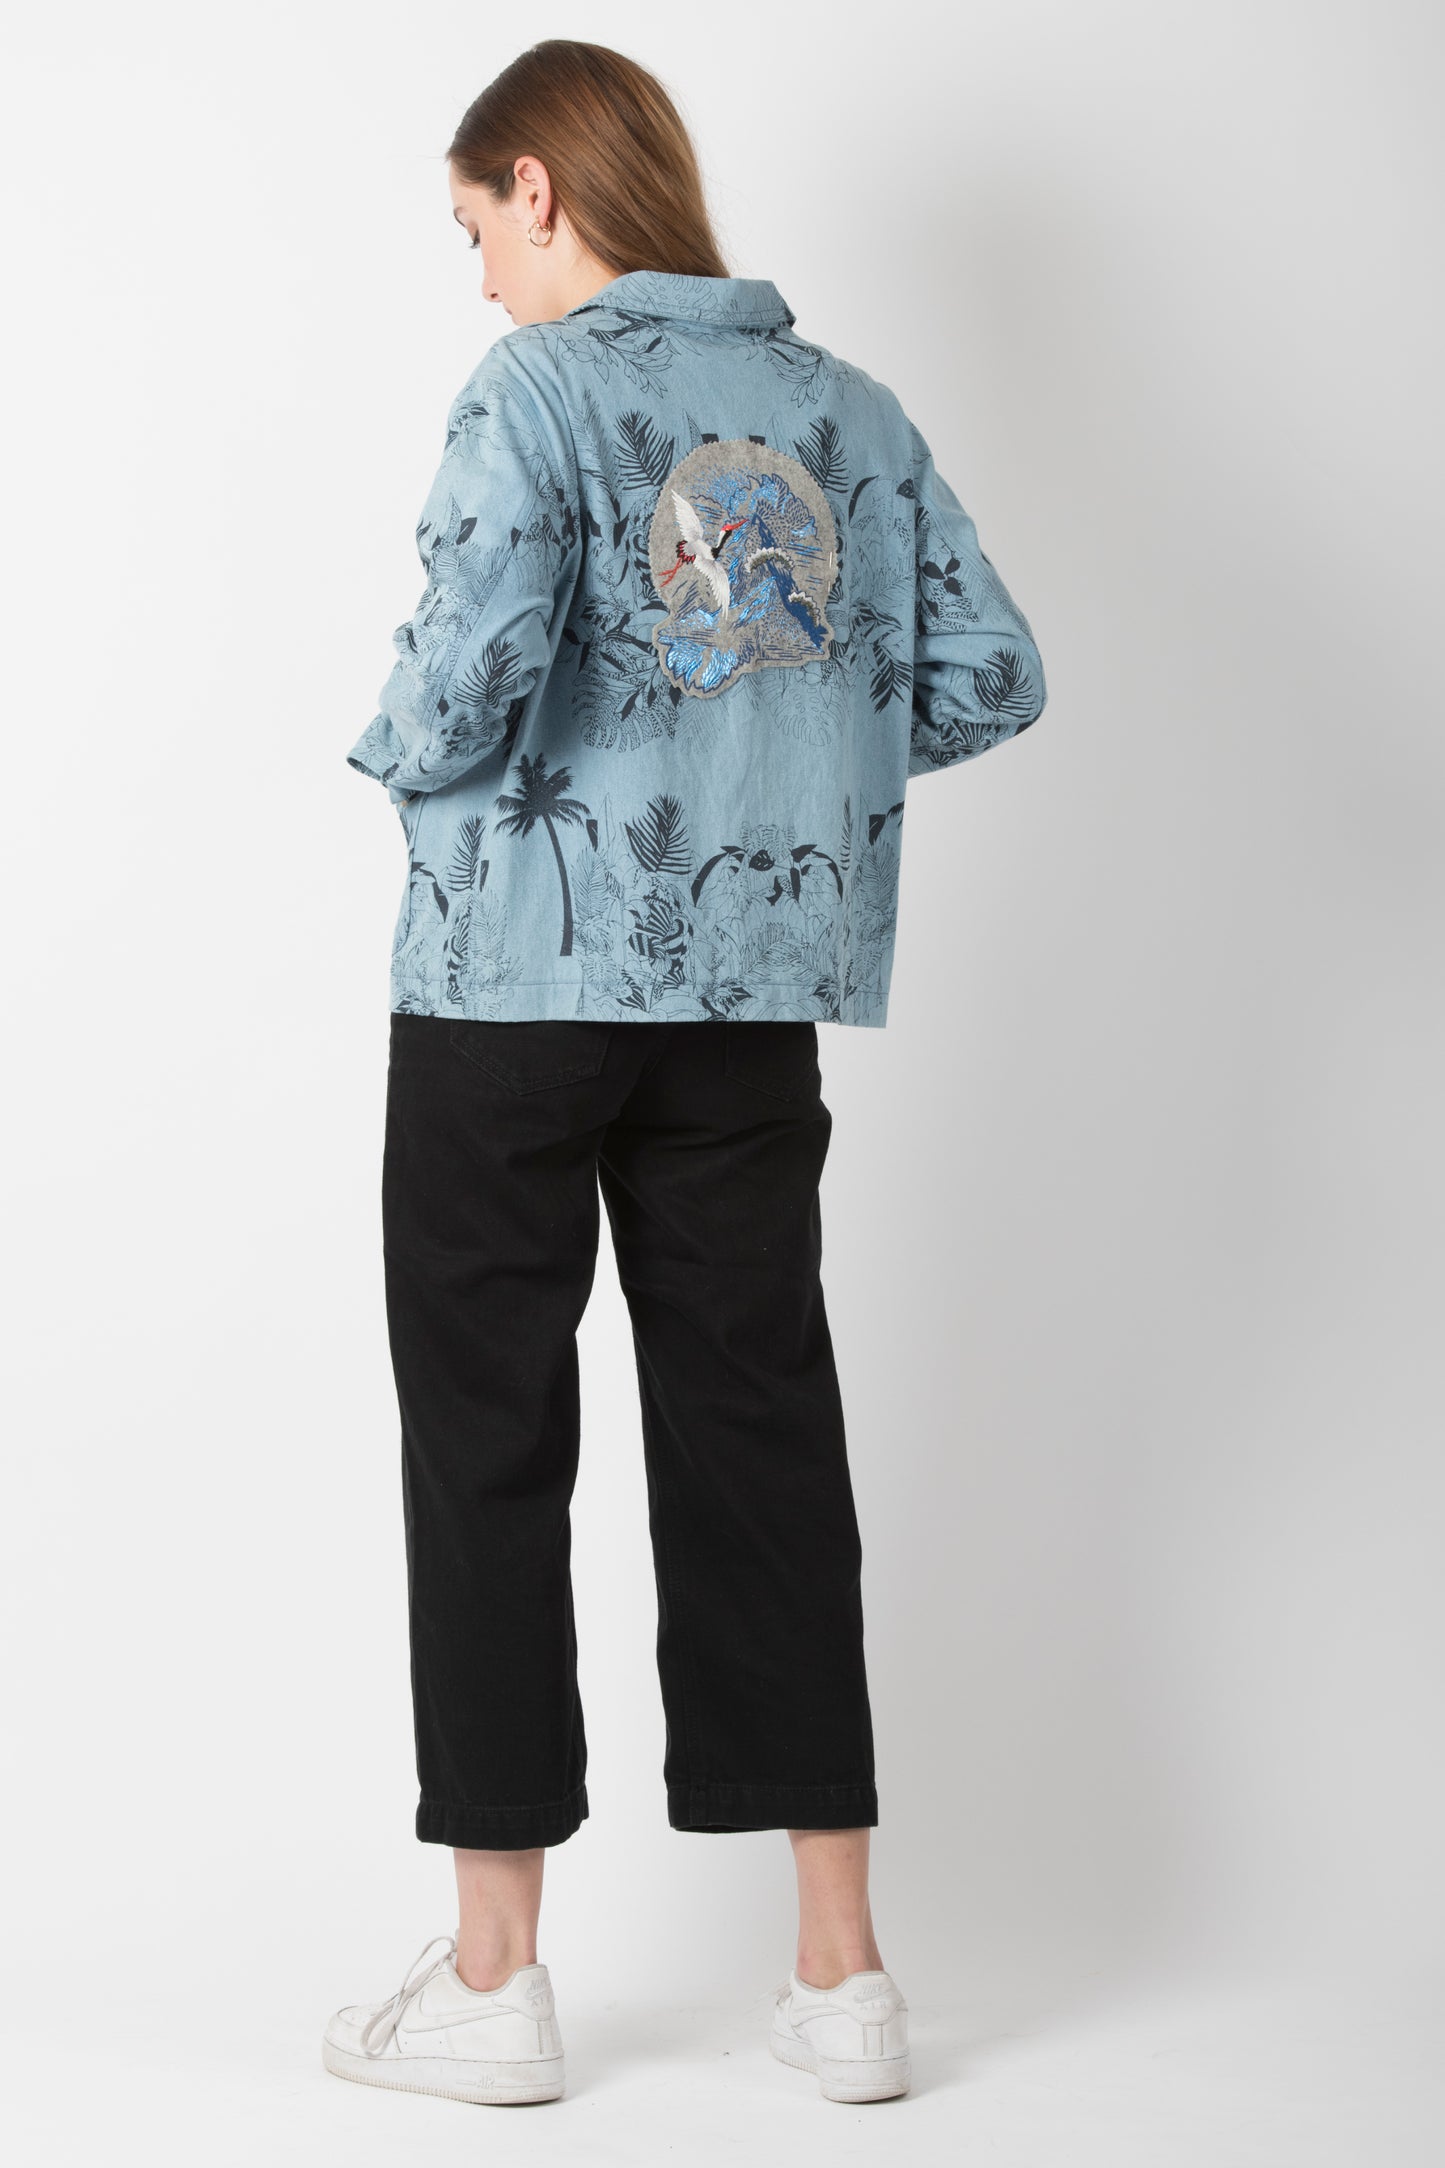 The back of a woman is seen, she is wearing a pale blue denim jacket, black trousers and white trainers. On the back of the denim jacket she is wearing is the foil printed & embroidered mountain crane patch